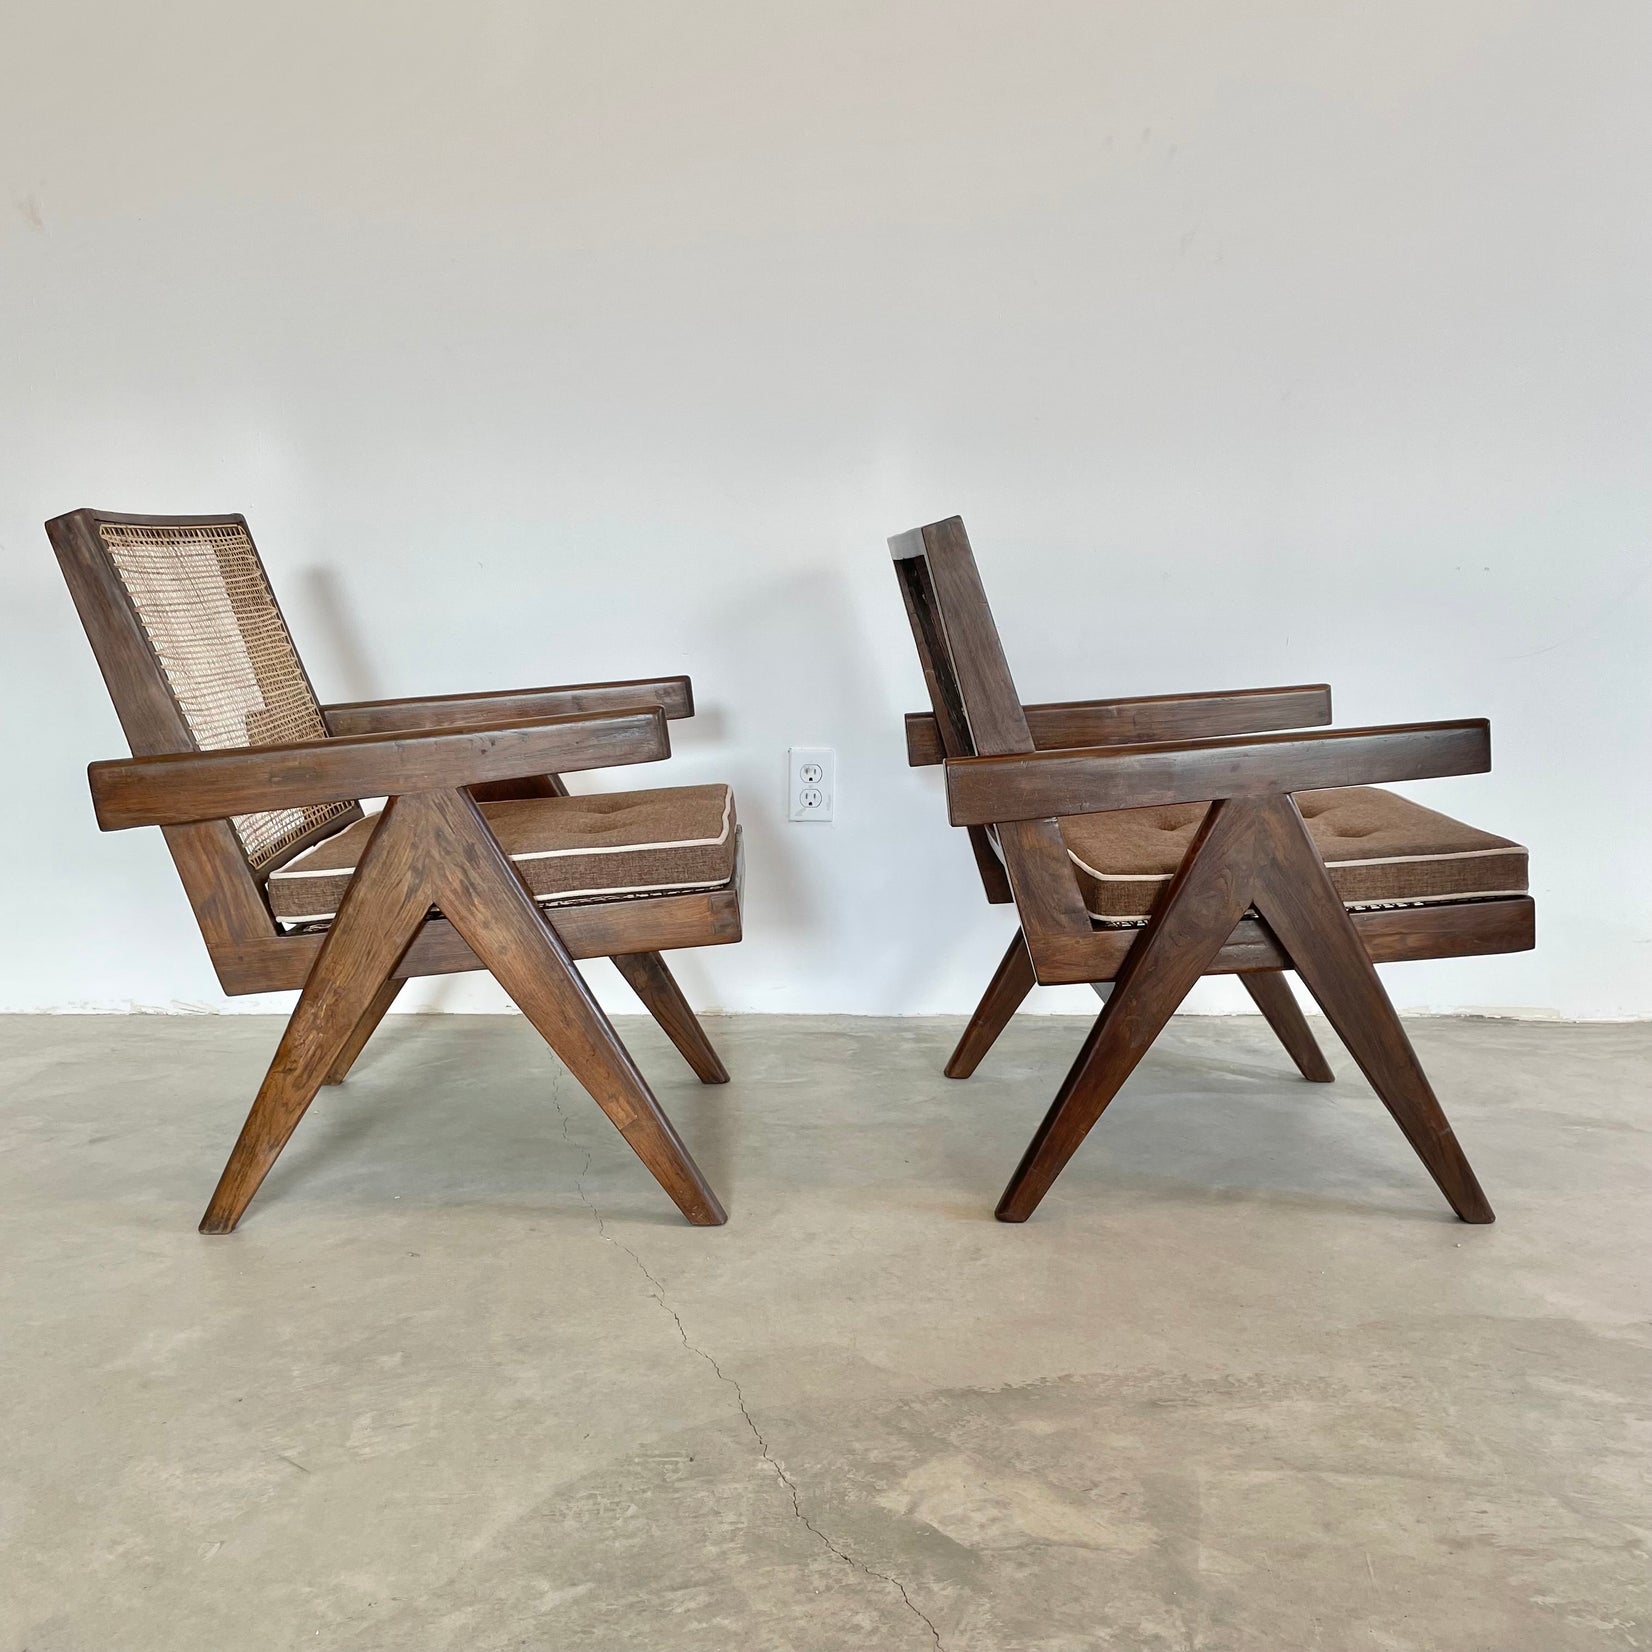 Pierre Jeanneret Easy Chairs, 1950s Chandigargh